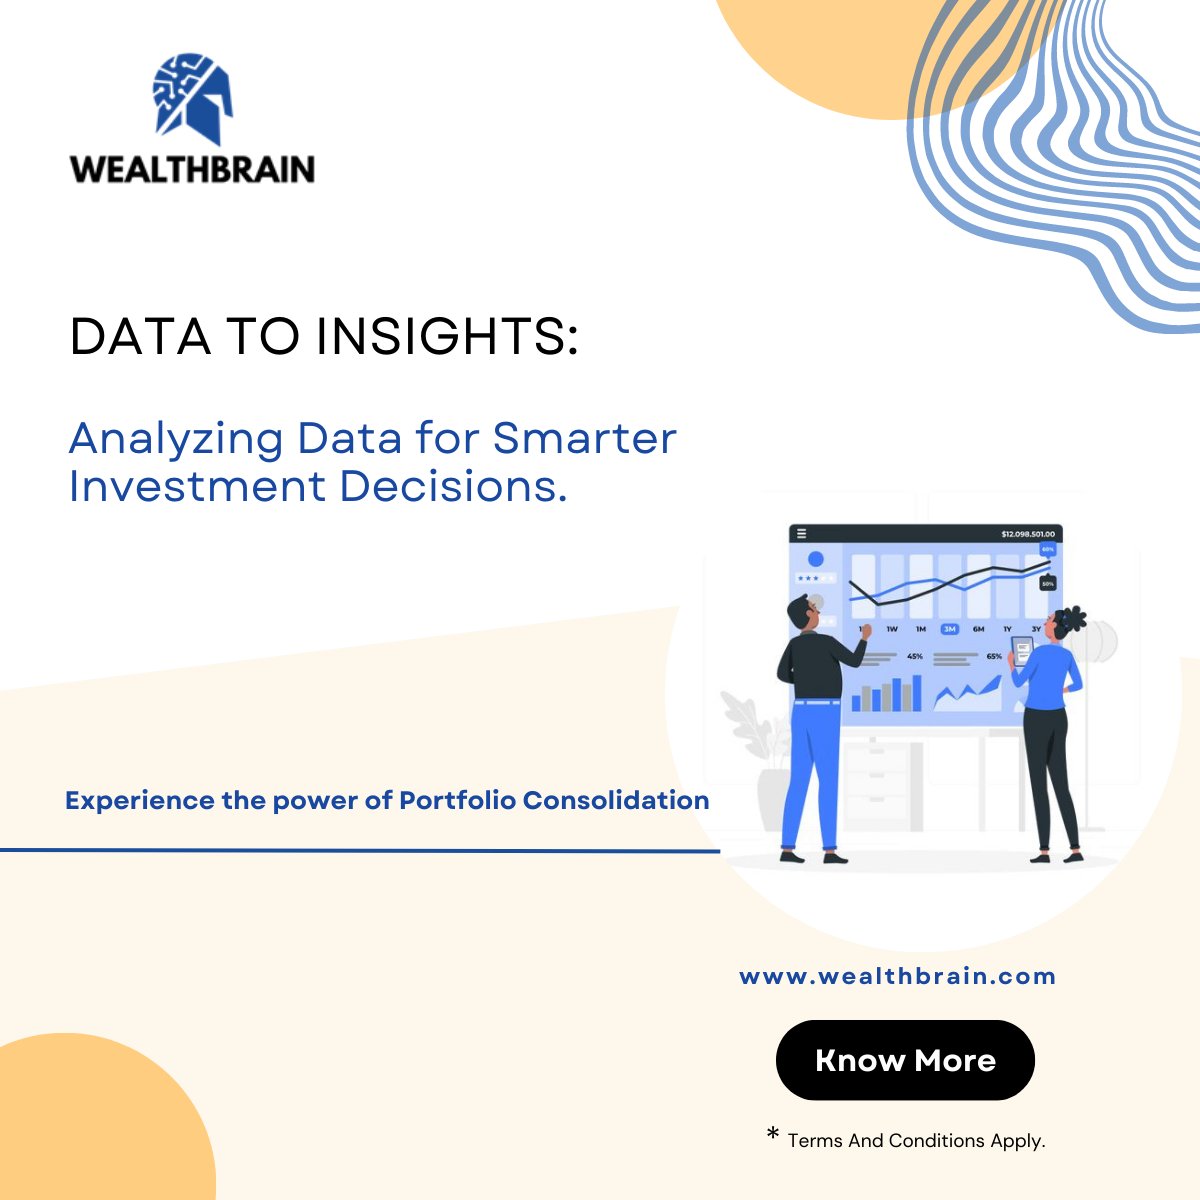 Unlock the power of data analysis to gain valuable insights for making smarter investment decisions. Transform raw data into meaningful information and make well-informed choices that drive your investment success.